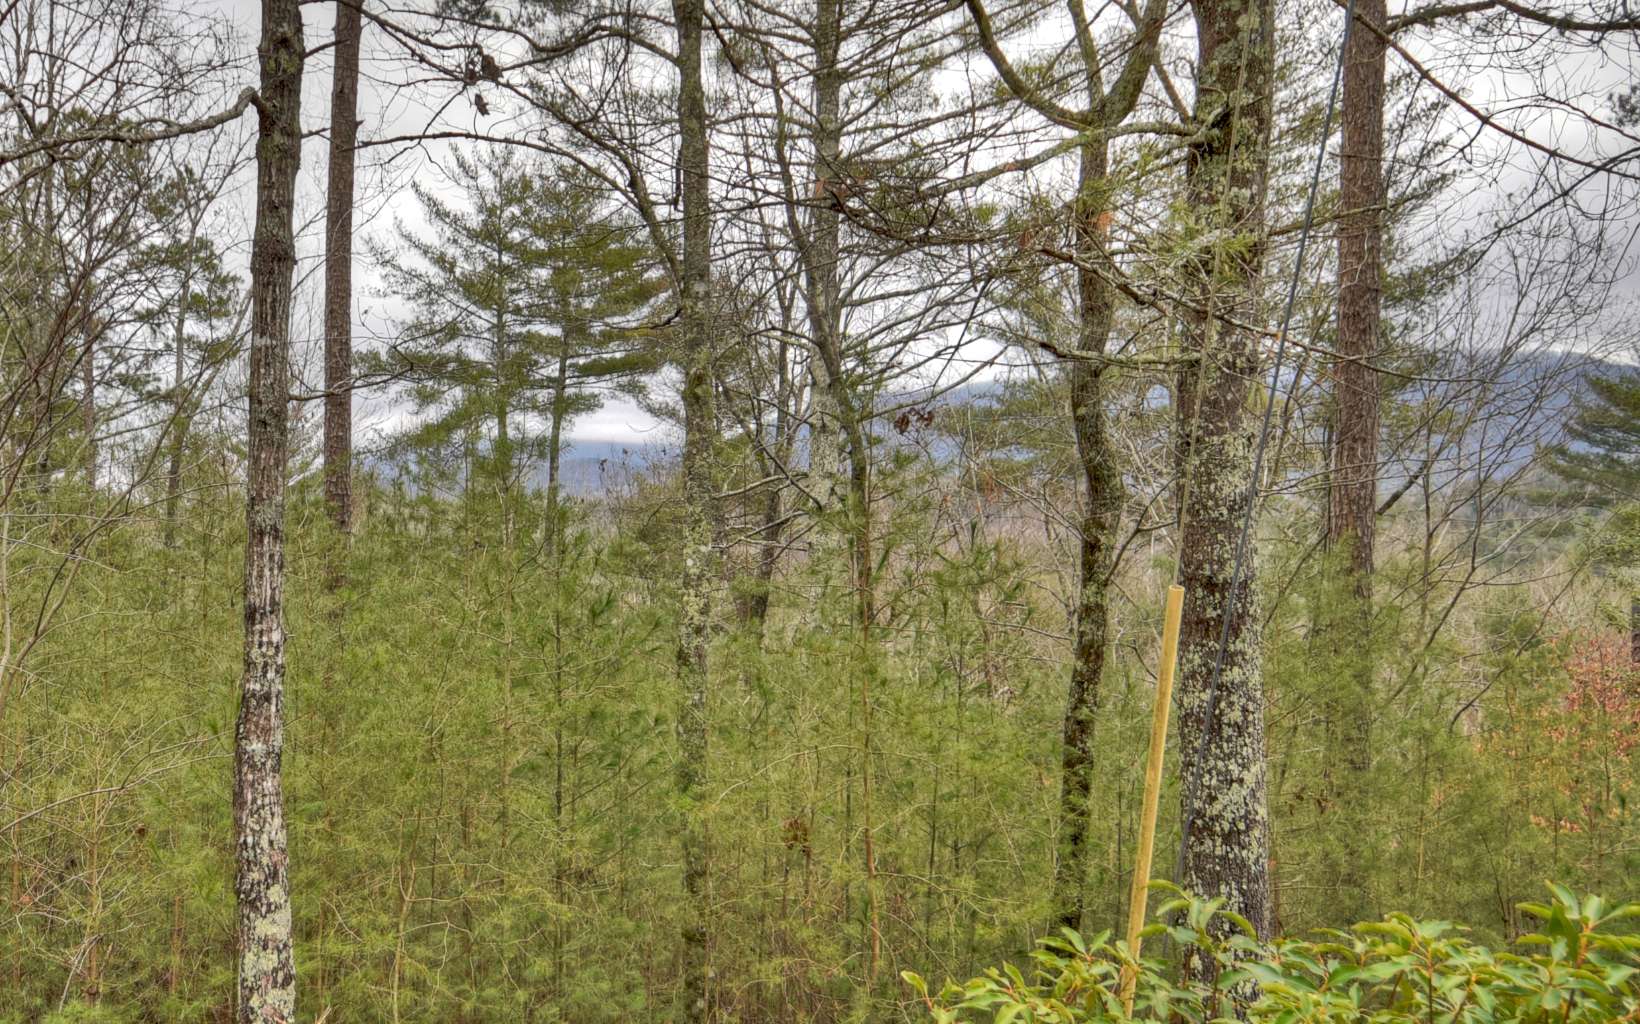 Beautiful lot in prestigious Buckhorn Estates. Check out this 1.68 acre lot with a year round MOUNTAIN VIEW! This gentle lot is builder friendly, with easy access. Buckhorn Estates is conveniently located between Blue Ridge and Ellijay with all paved roads, hi speed Internet available & low HOA fees ($200 per year). This community offers a beautiful river park on the Ellijay River (very popular for exercise and dog walking), an 8 acre fishing lake, and the pleasure of driving your golf cart over to Whitepath Golf Course. This 18 hole GOLF COURSE is open to the public. And Ellijay River Vineyards is located near the entrance of the community. Residents enjoy the changing of the seasons while viewing the abundance of wildlife. Everything to enjoy about the mountains and only 10 minutes to town. (Gilmer County offers "no school tax" for full time residents over the age of 65.)